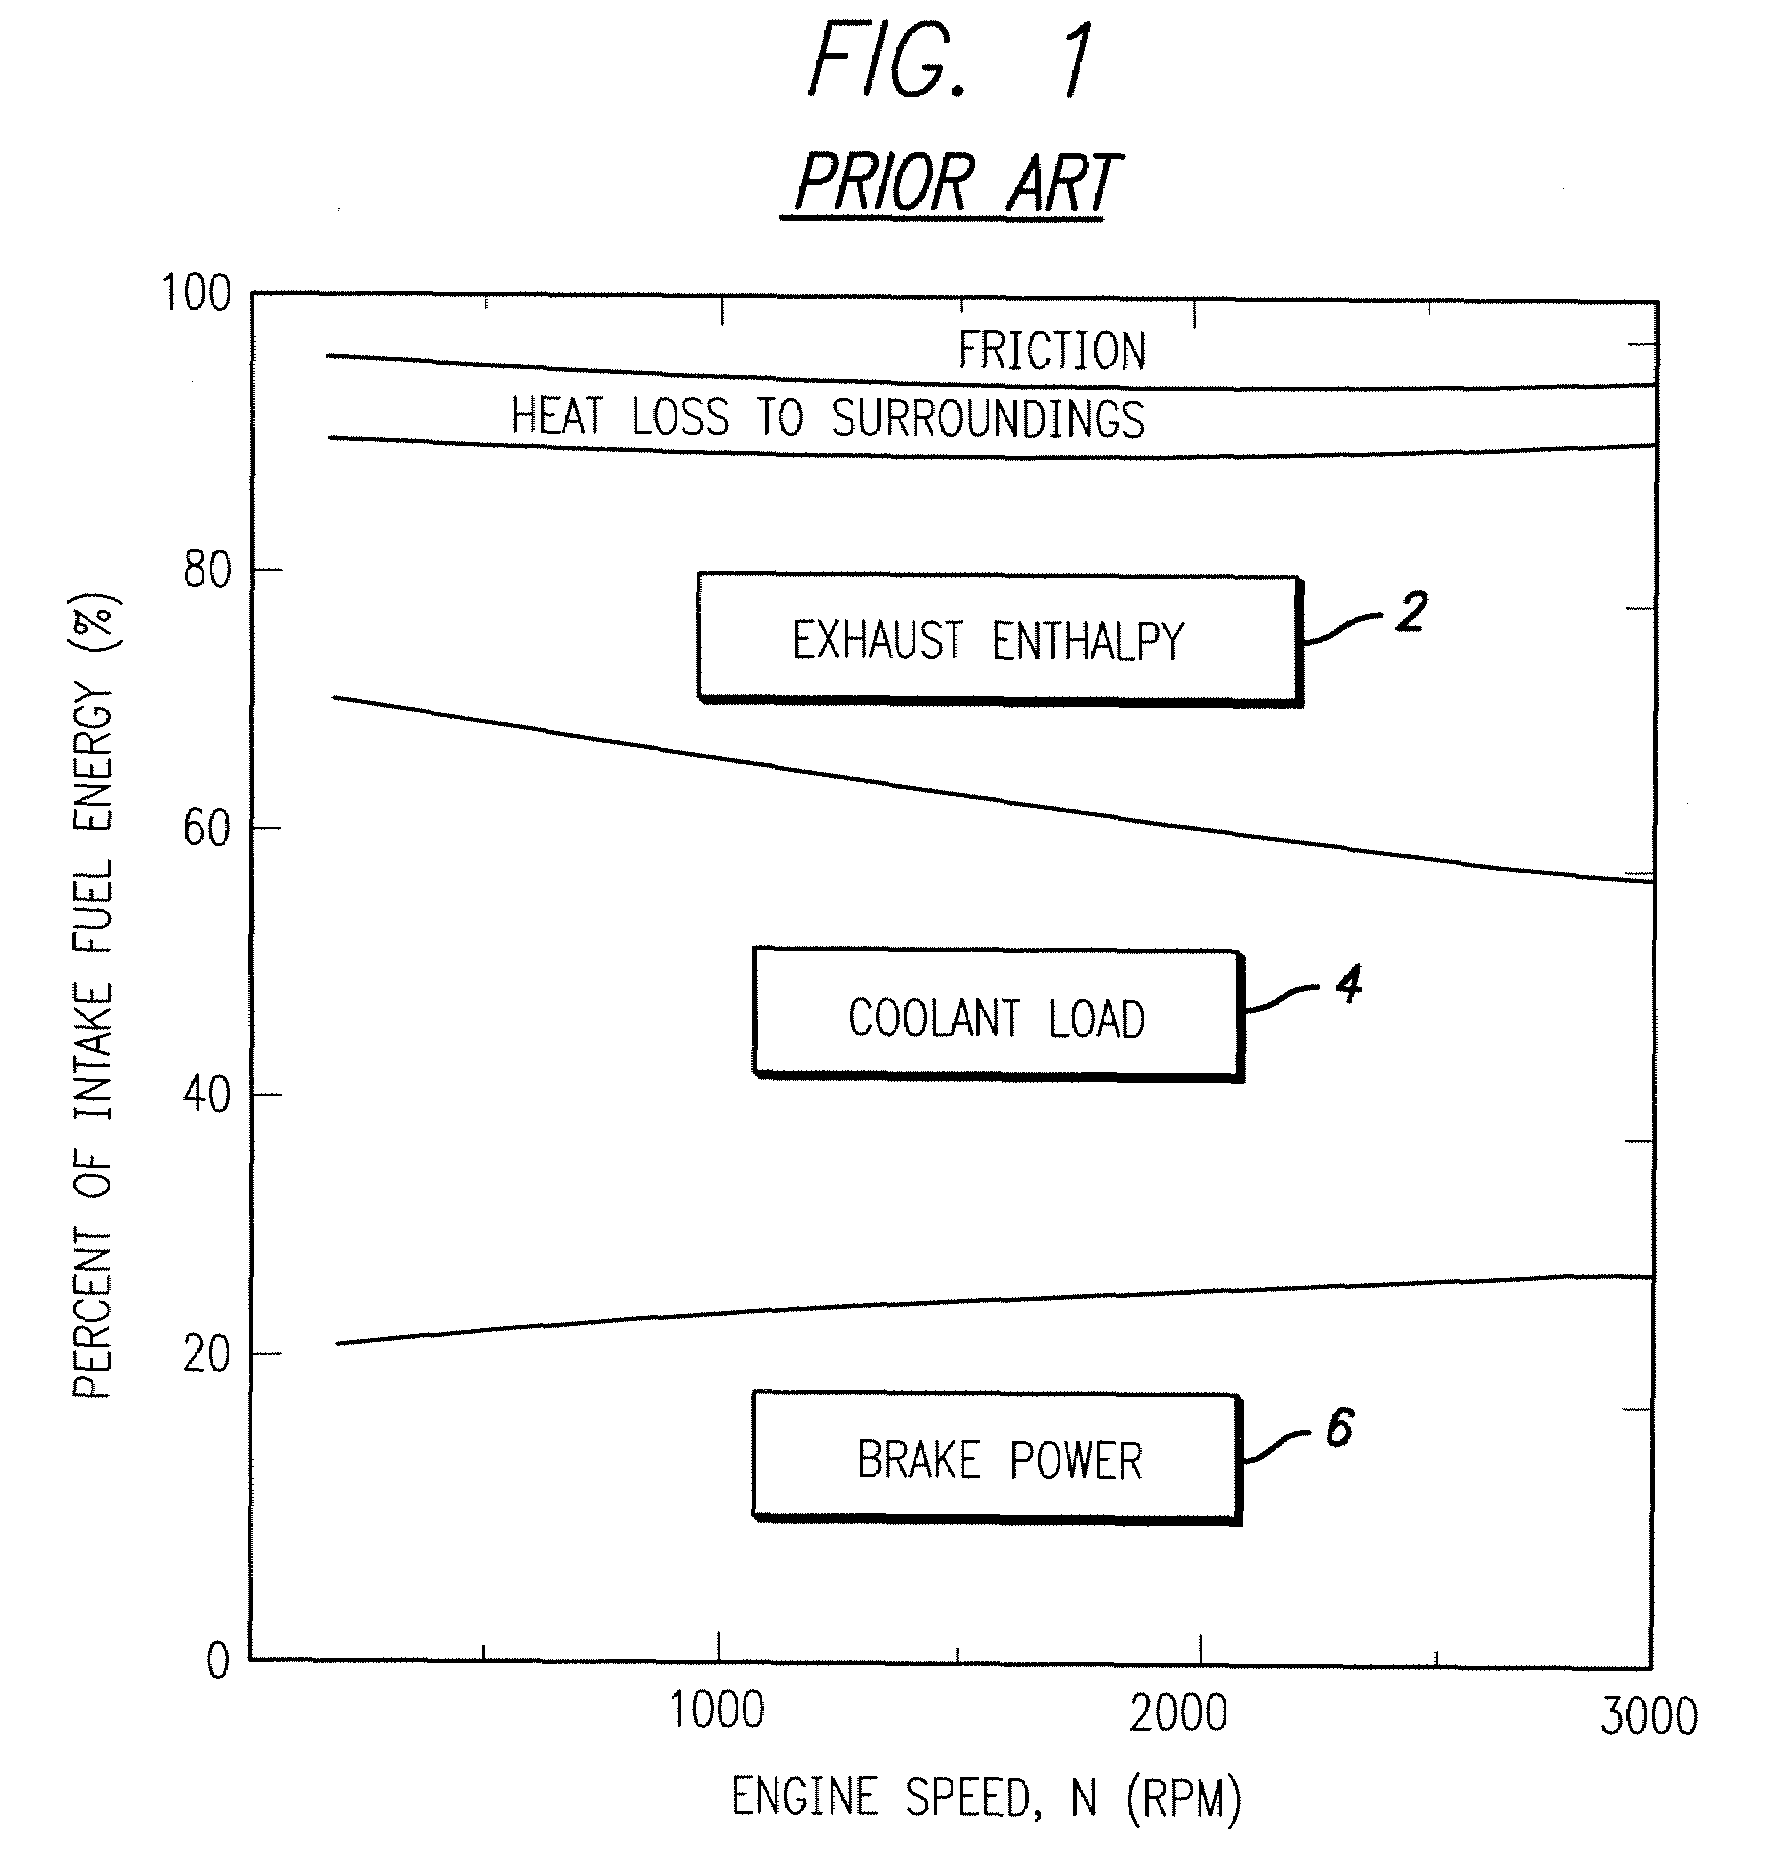 Fuel injector having algorithm controlled look-ahead timing for injector-ignition operation